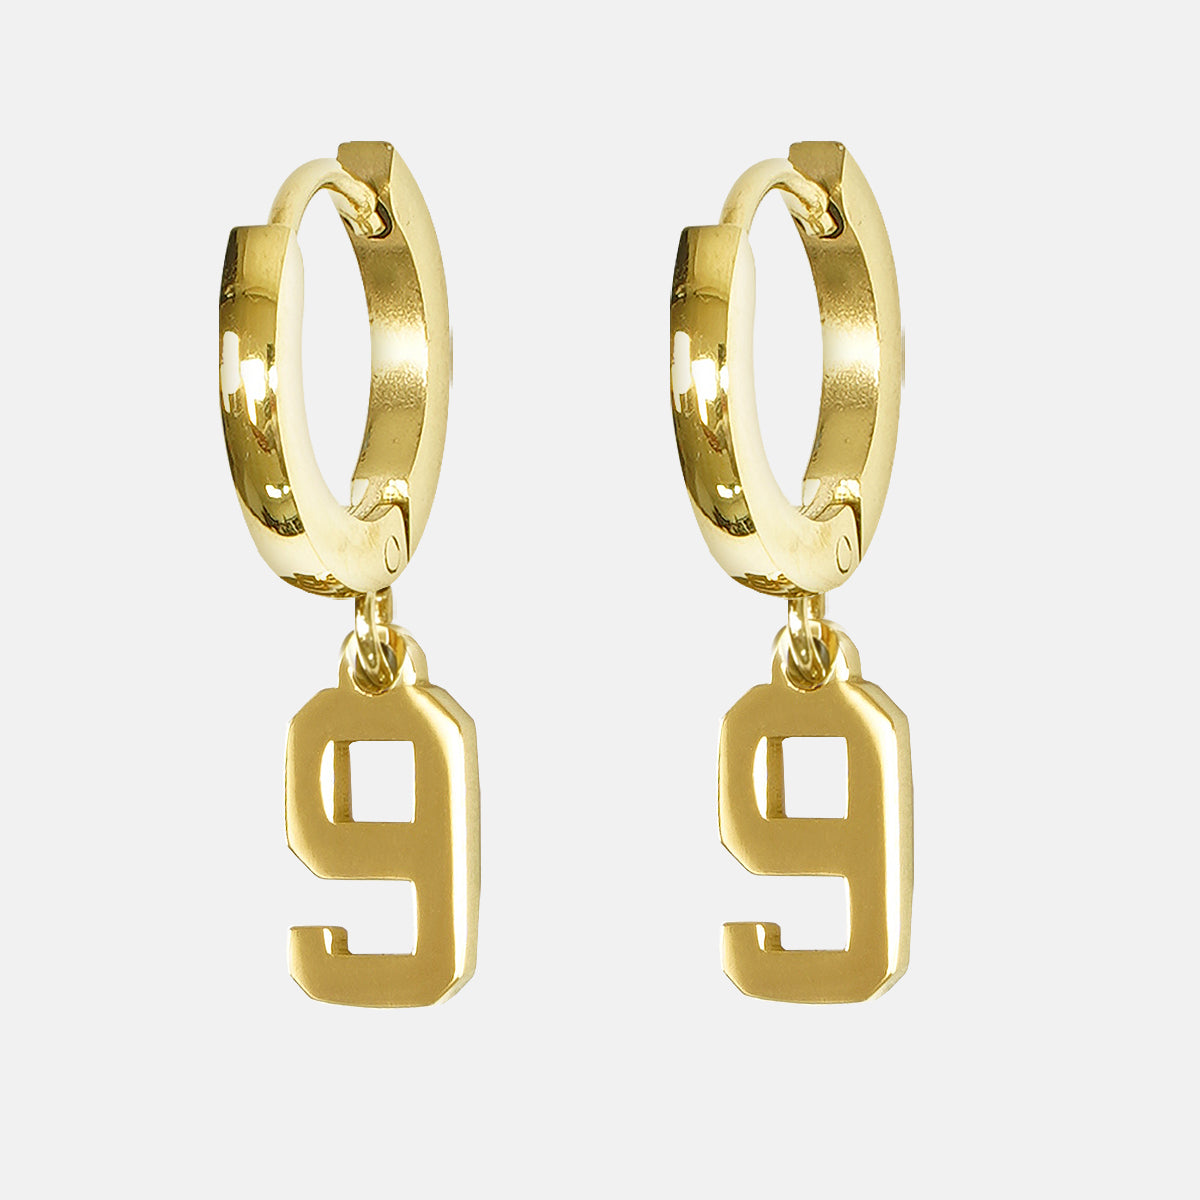 9 Number Earring - Gold Plated Stainless Steel